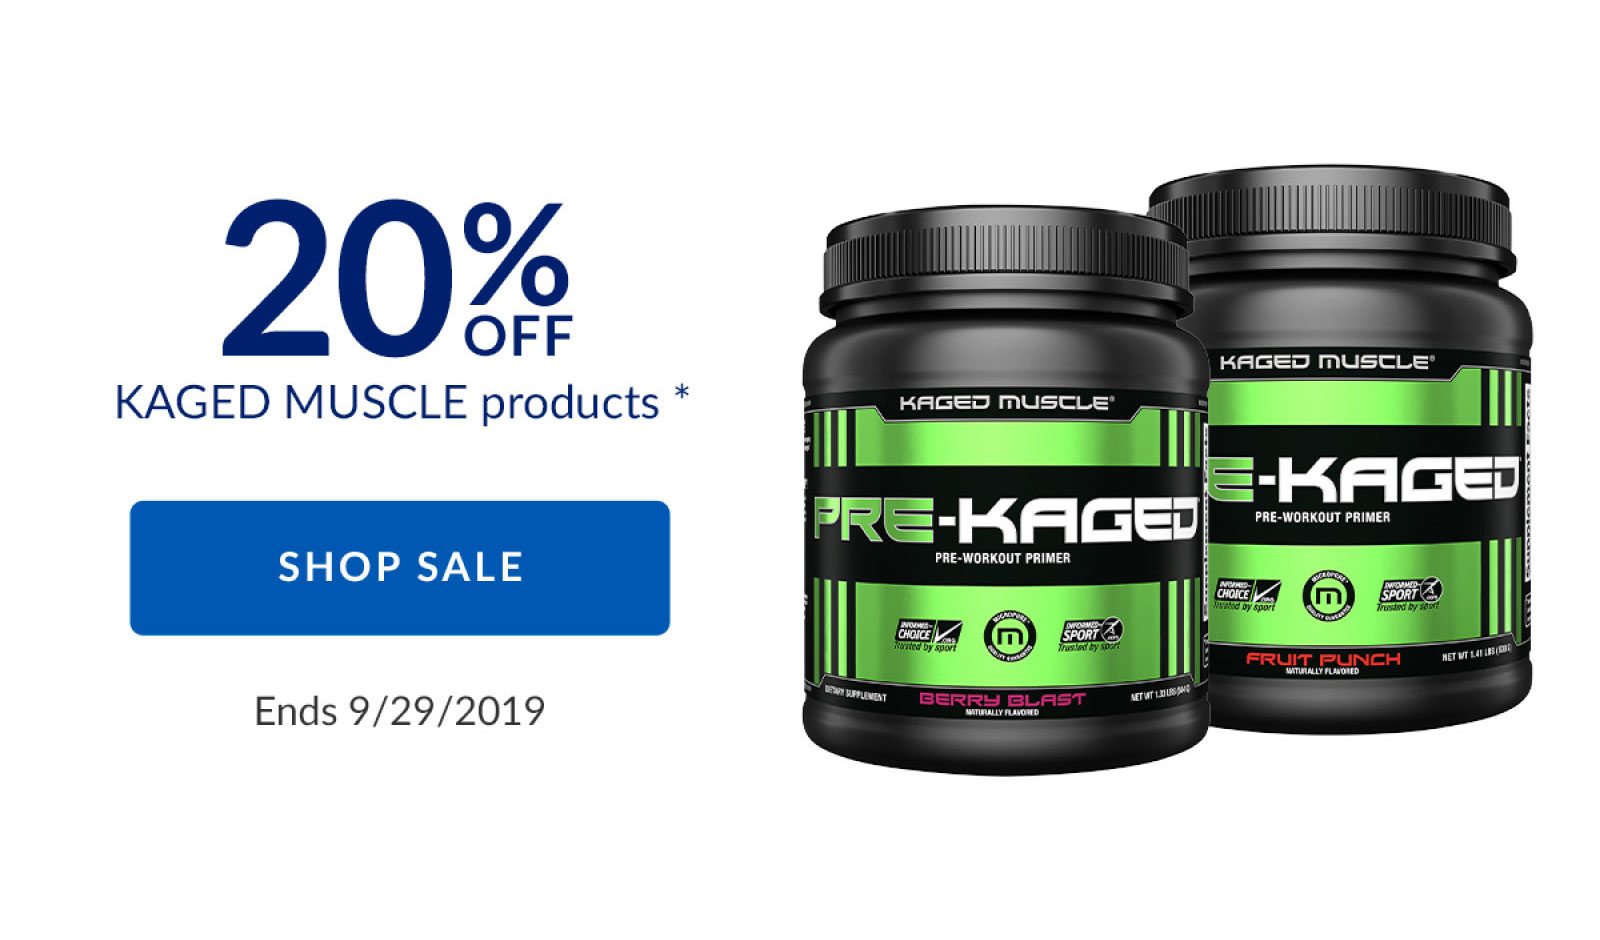 20% OFF KAGED MUSCLE products * | SHOP SALE | Ends 9/29/2019